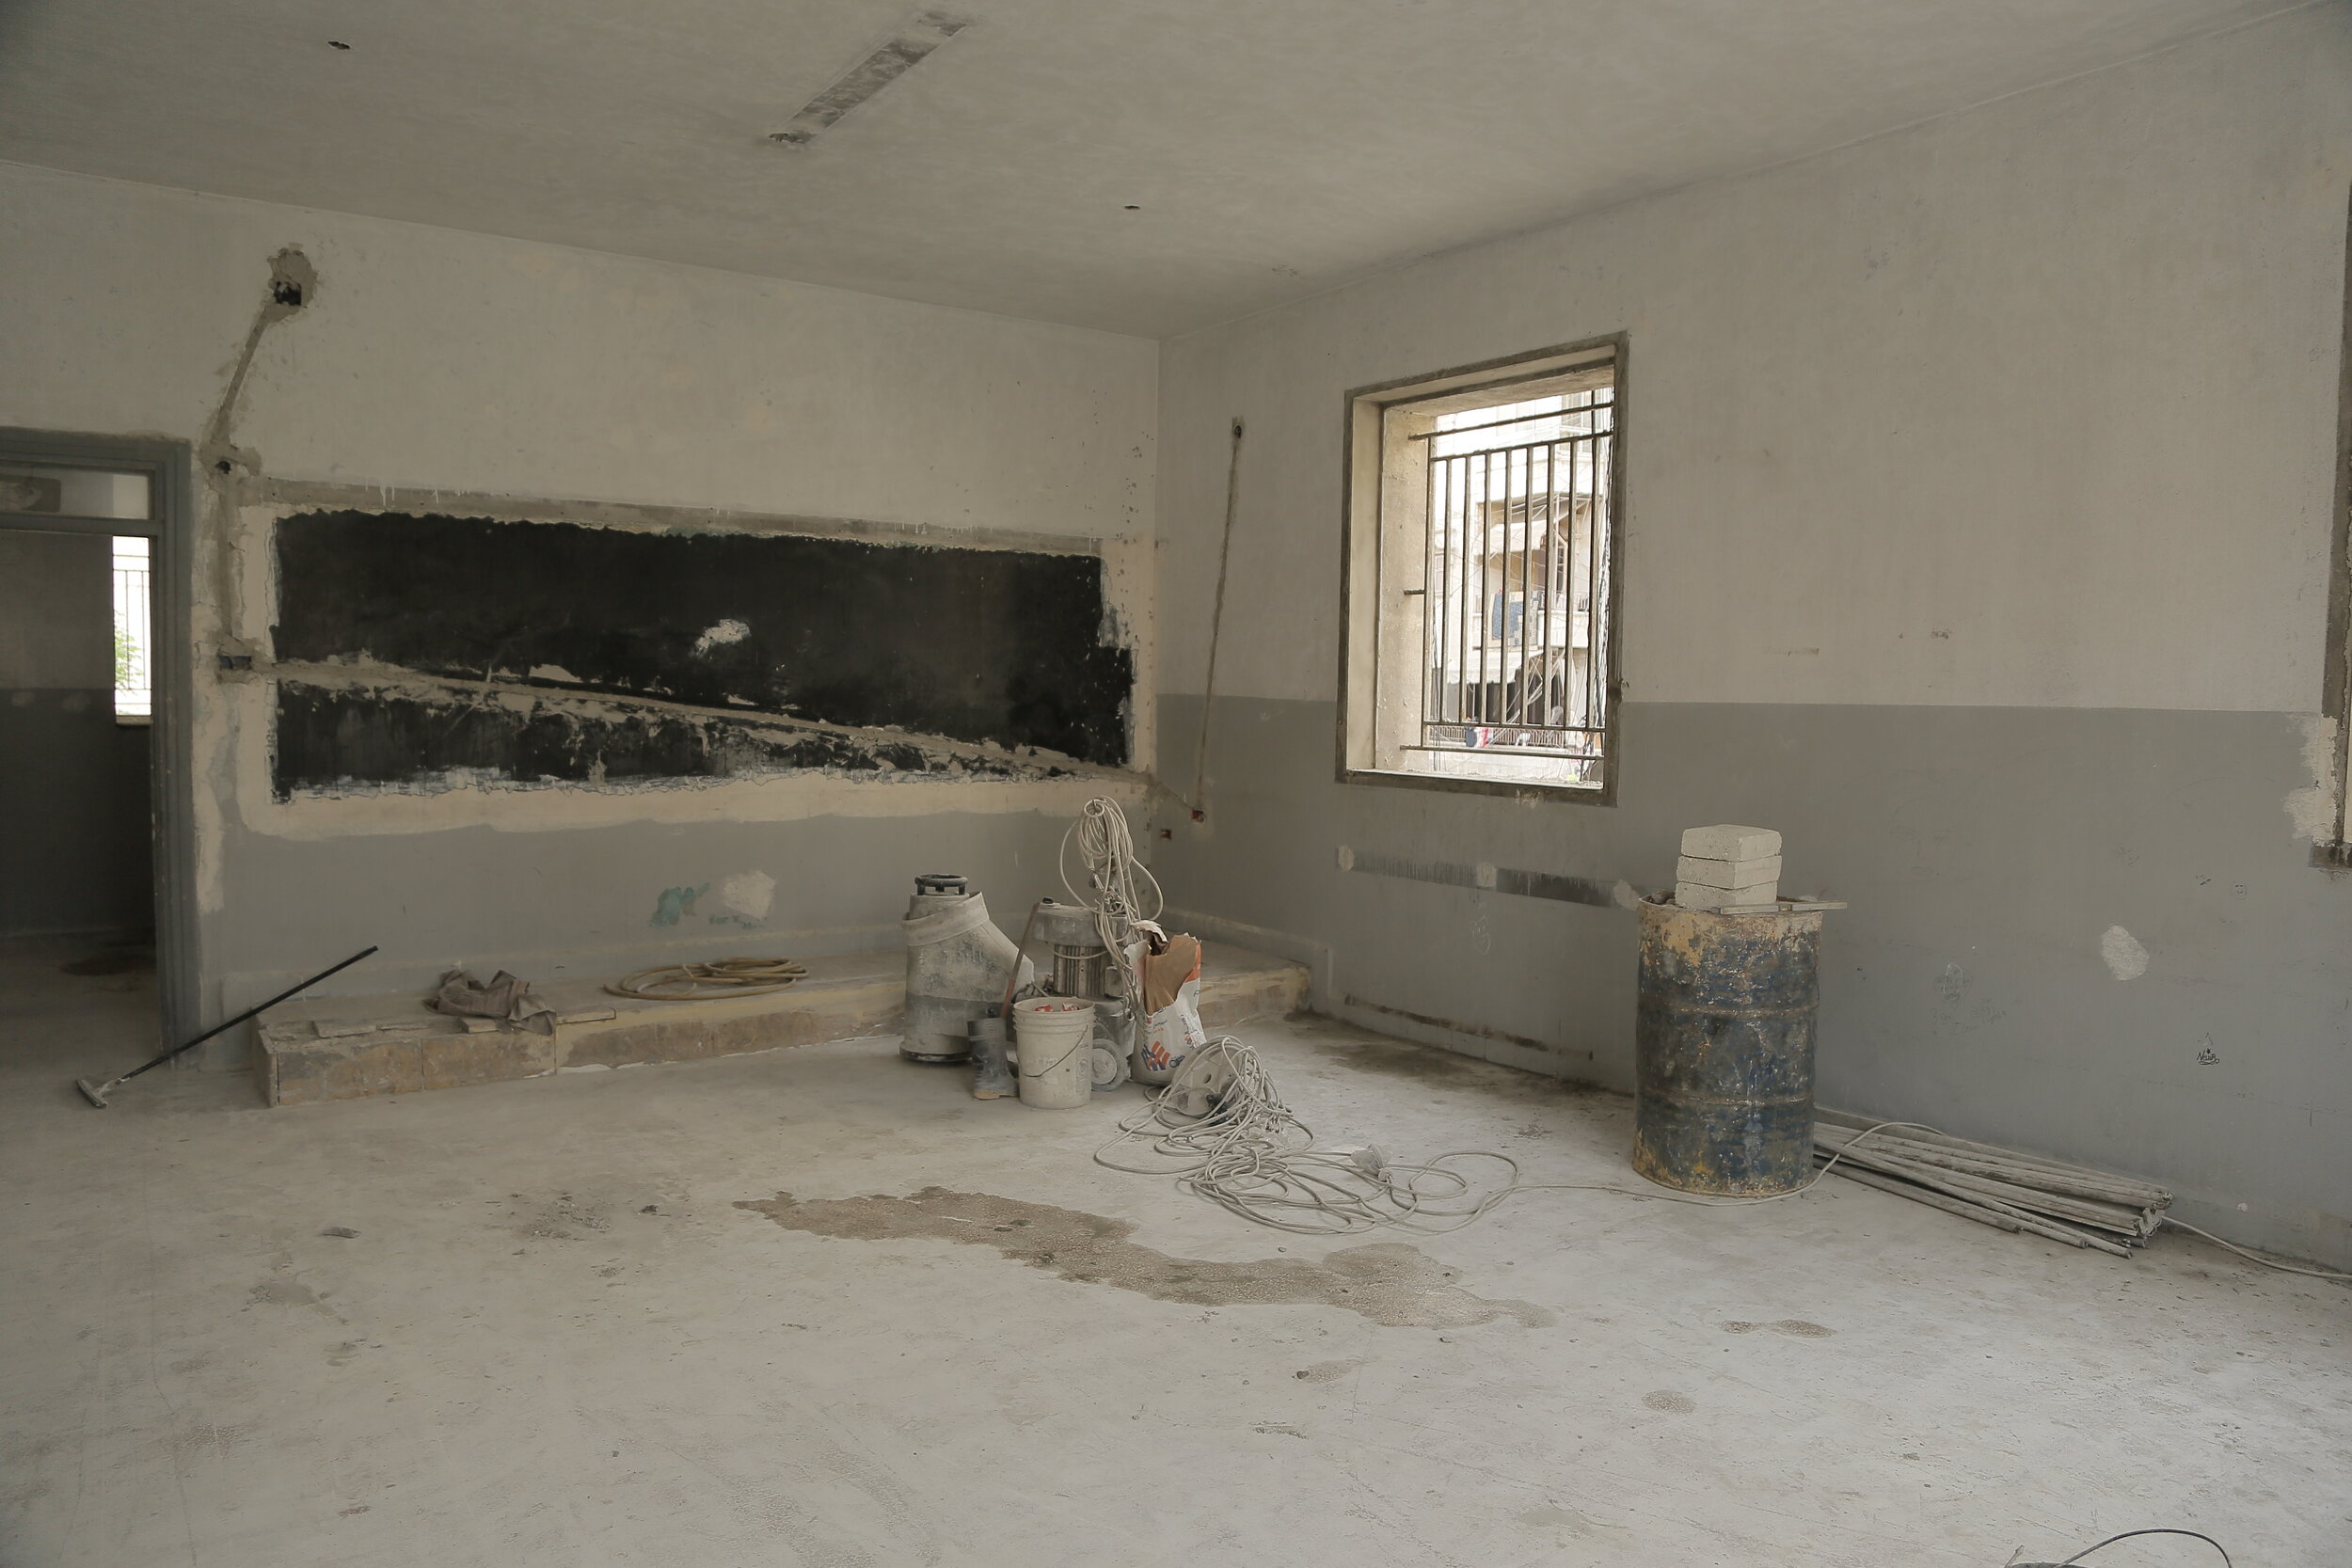 Private syrian secondary school - during rehabilitation (4).JPG